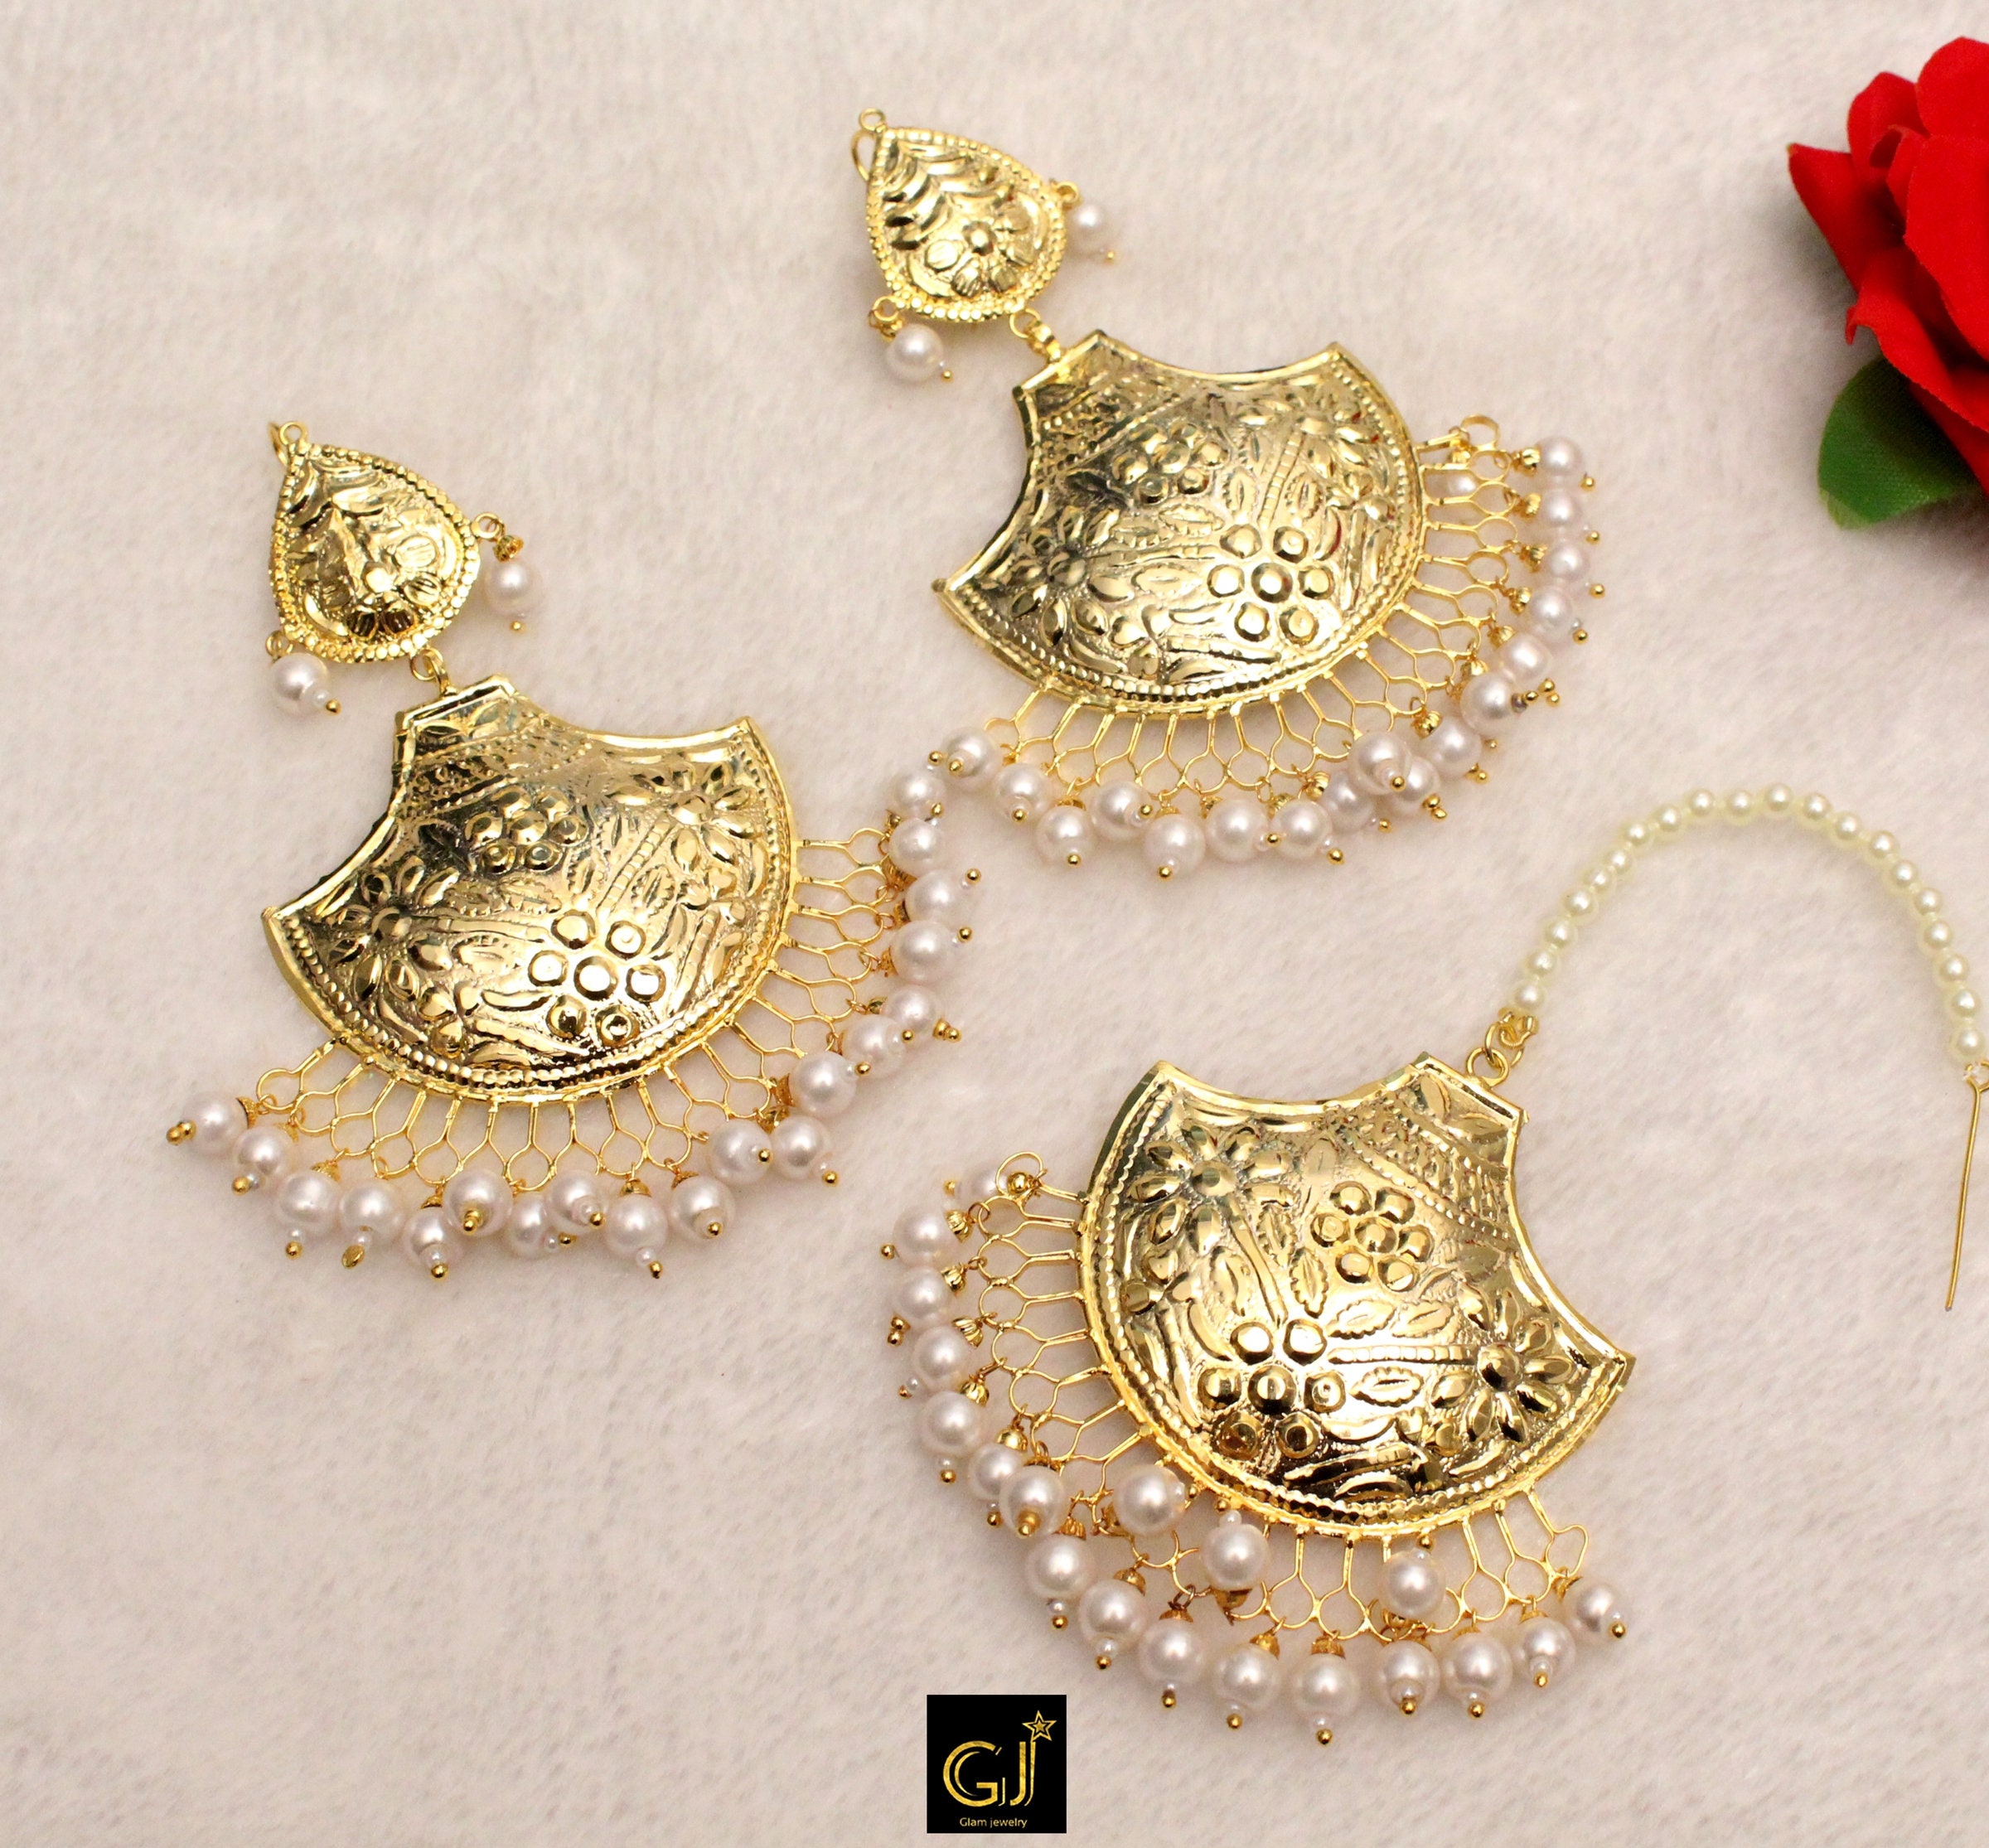 Round Yellow Beautiful Oxidised Golden Earrings at Rs 35/pair in New Delhi